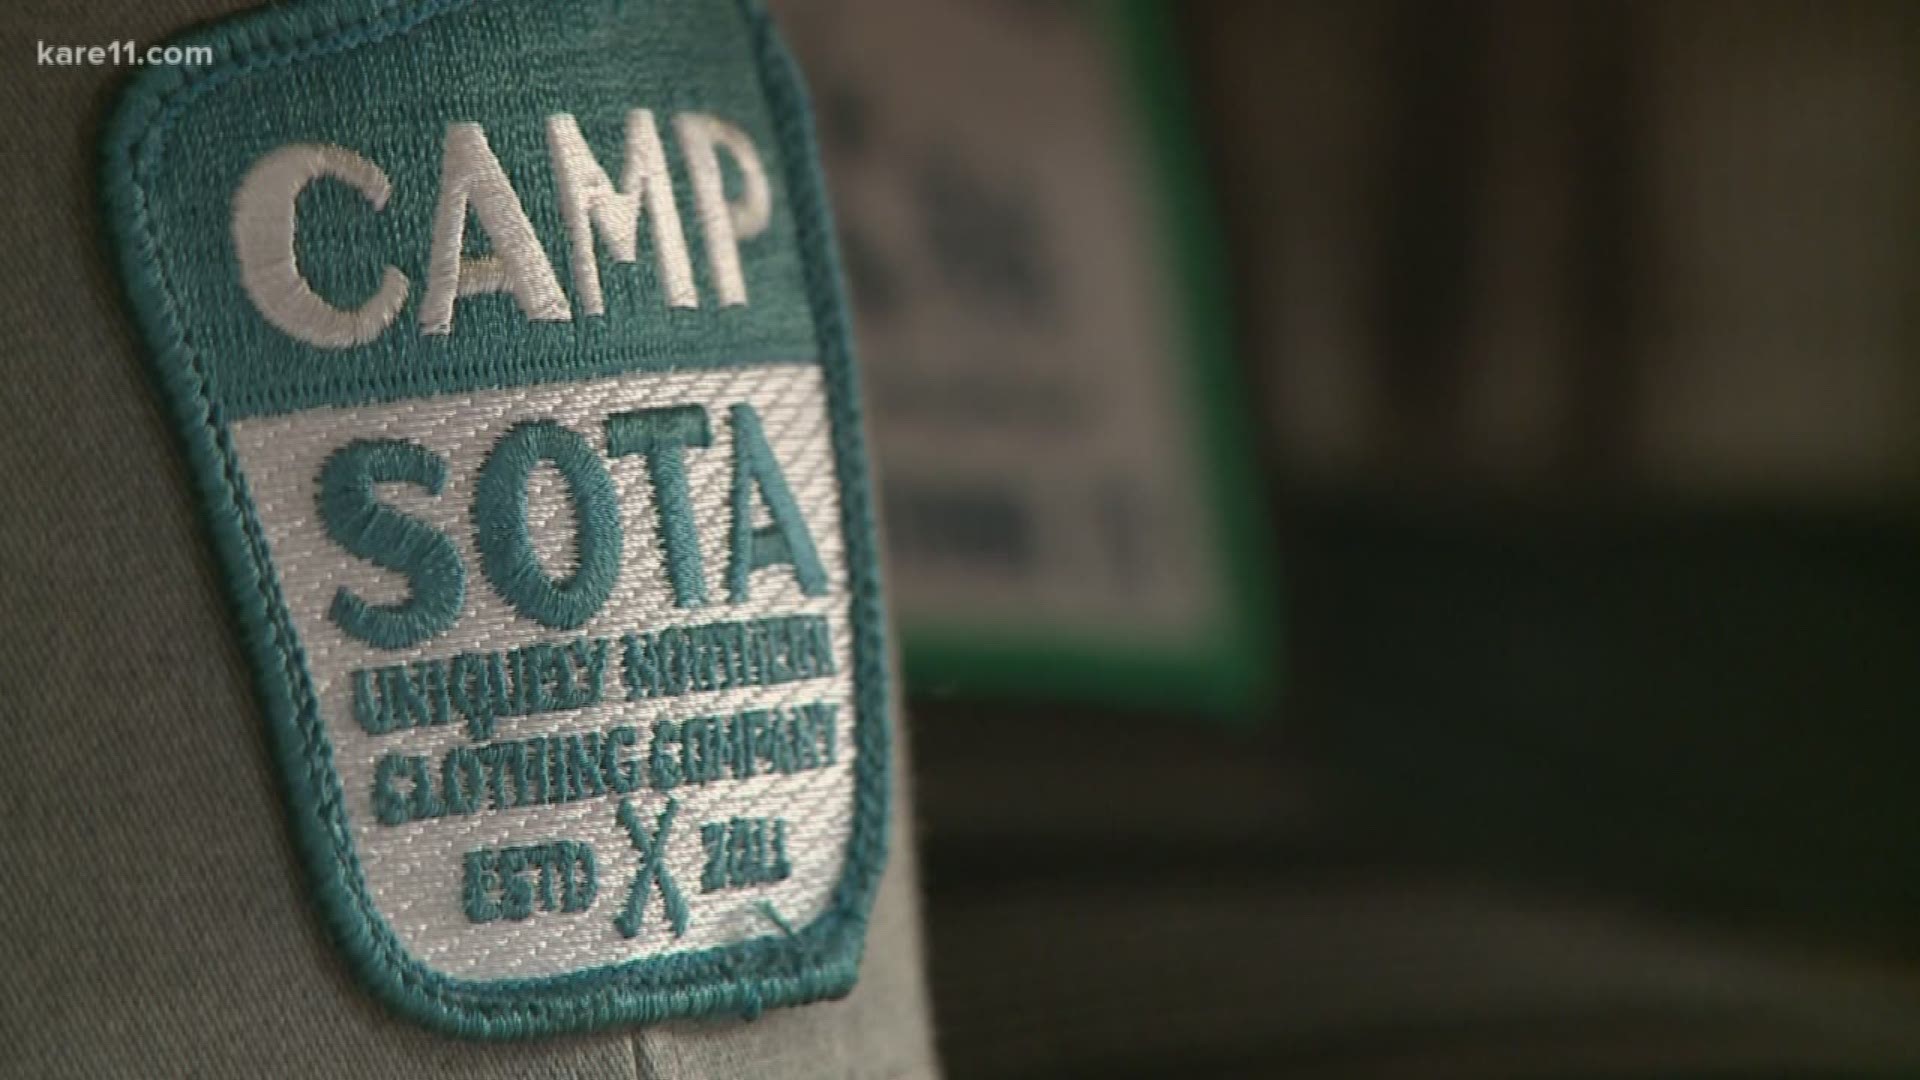 A month ago, Sota Clothing moved to St. Louis Park, where it plans to open its first store within the next month. https://kare11.tv/2JqjhoV